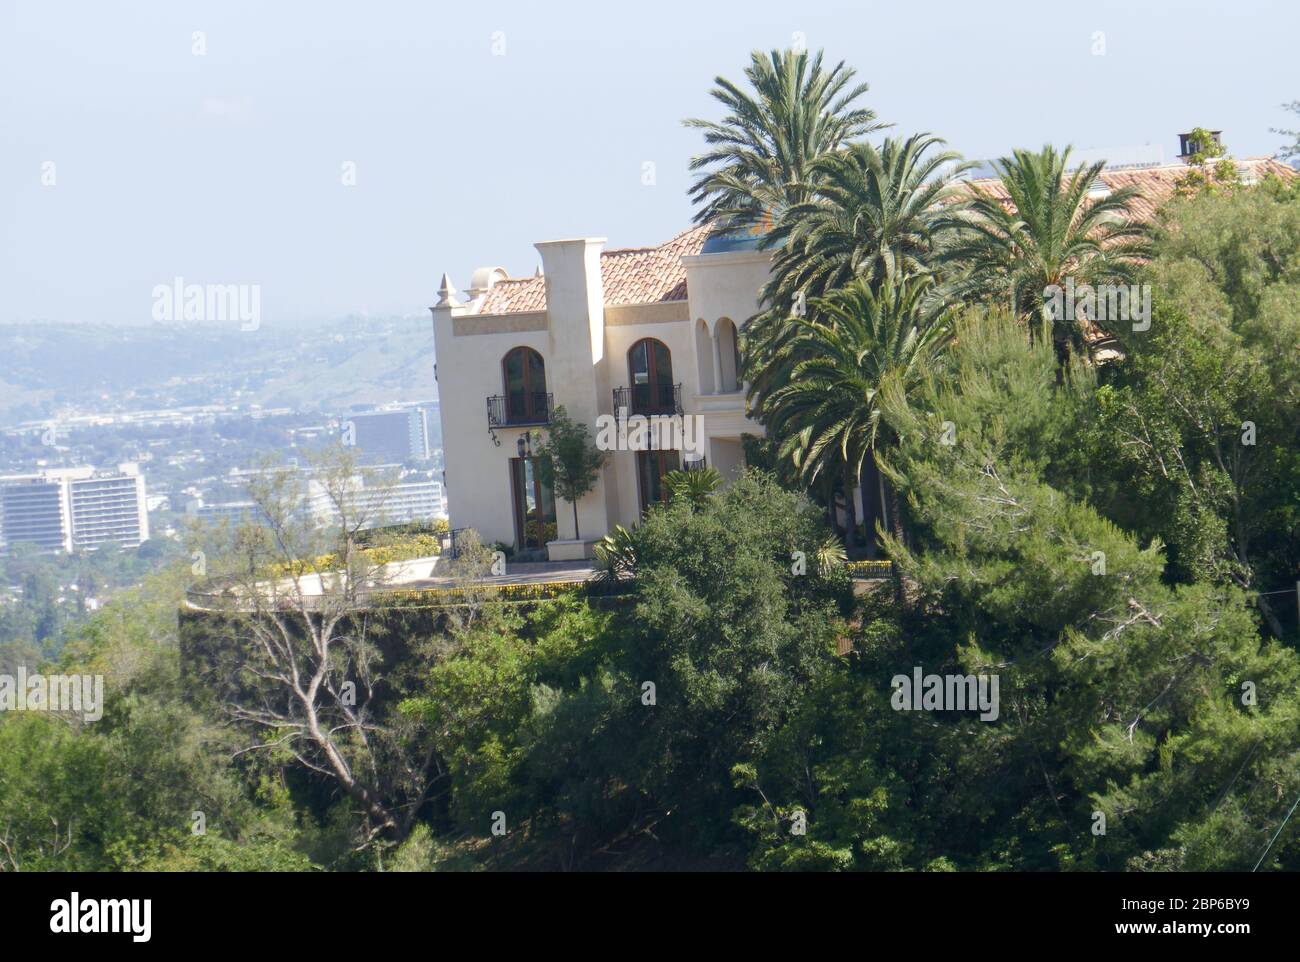 Beverly Hills, California, USA 17th May 2020 A general view of atmosphere of 10066 Cielo Drive where Shaton Tate Lived and Mansion Murders took place (formerly 10050 Cielo Drive) on May 17, 2020 in Beverly Hills, California, USA. Photo by Barry King/Alamy Stock Photo Stock Photo